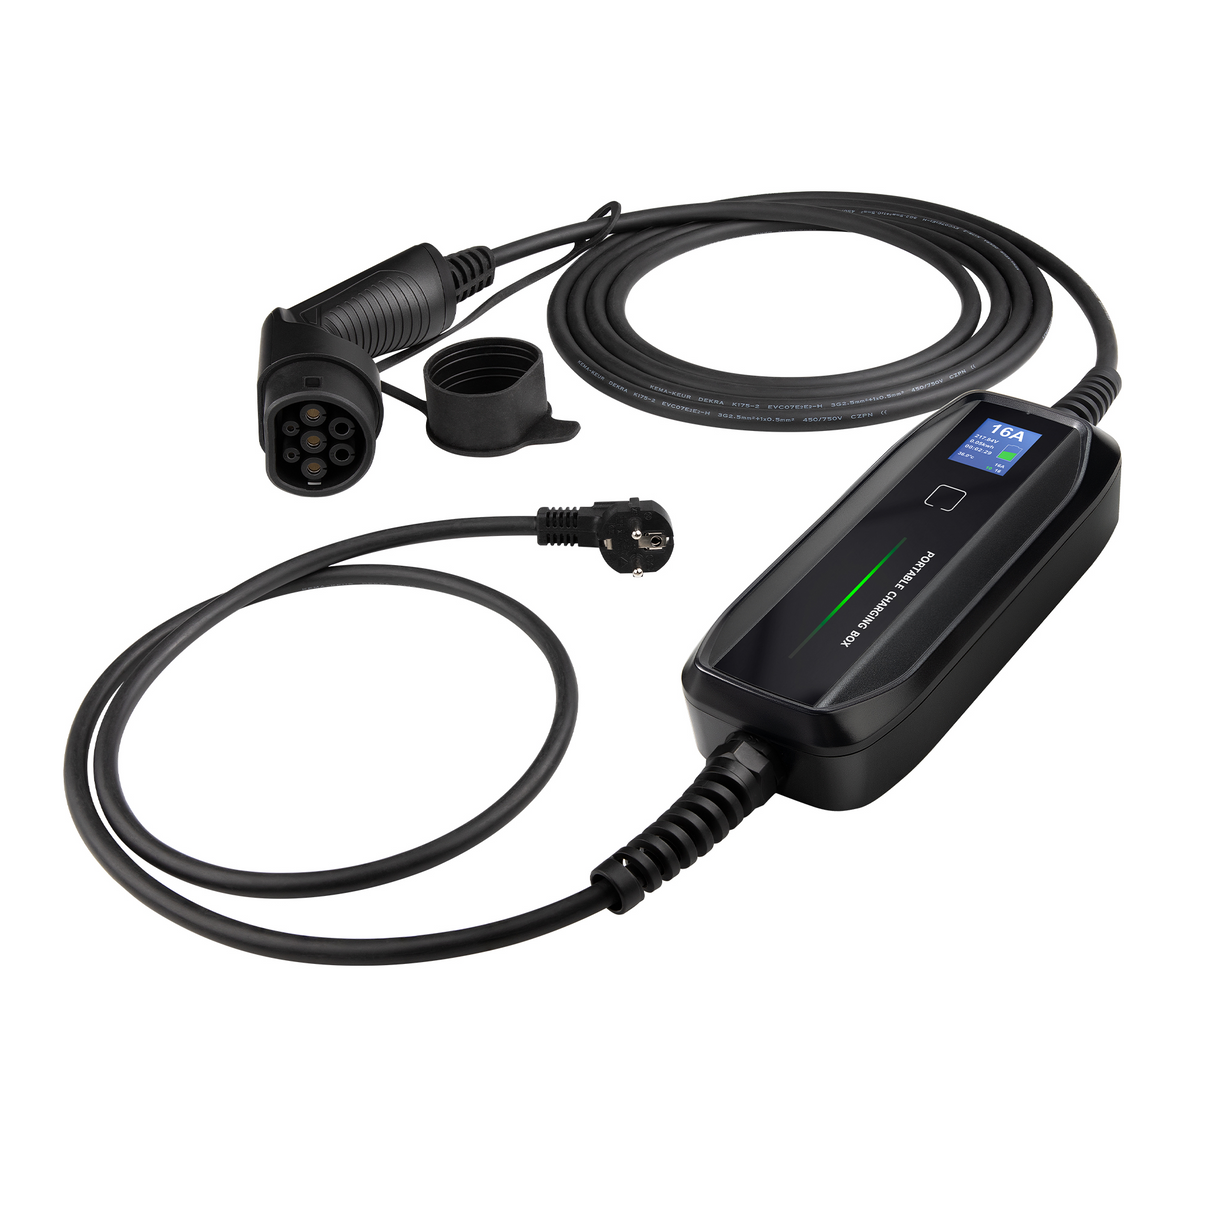 Mobile Charger Toyota Prius - Besen with LCD - Type 2 to Schuko